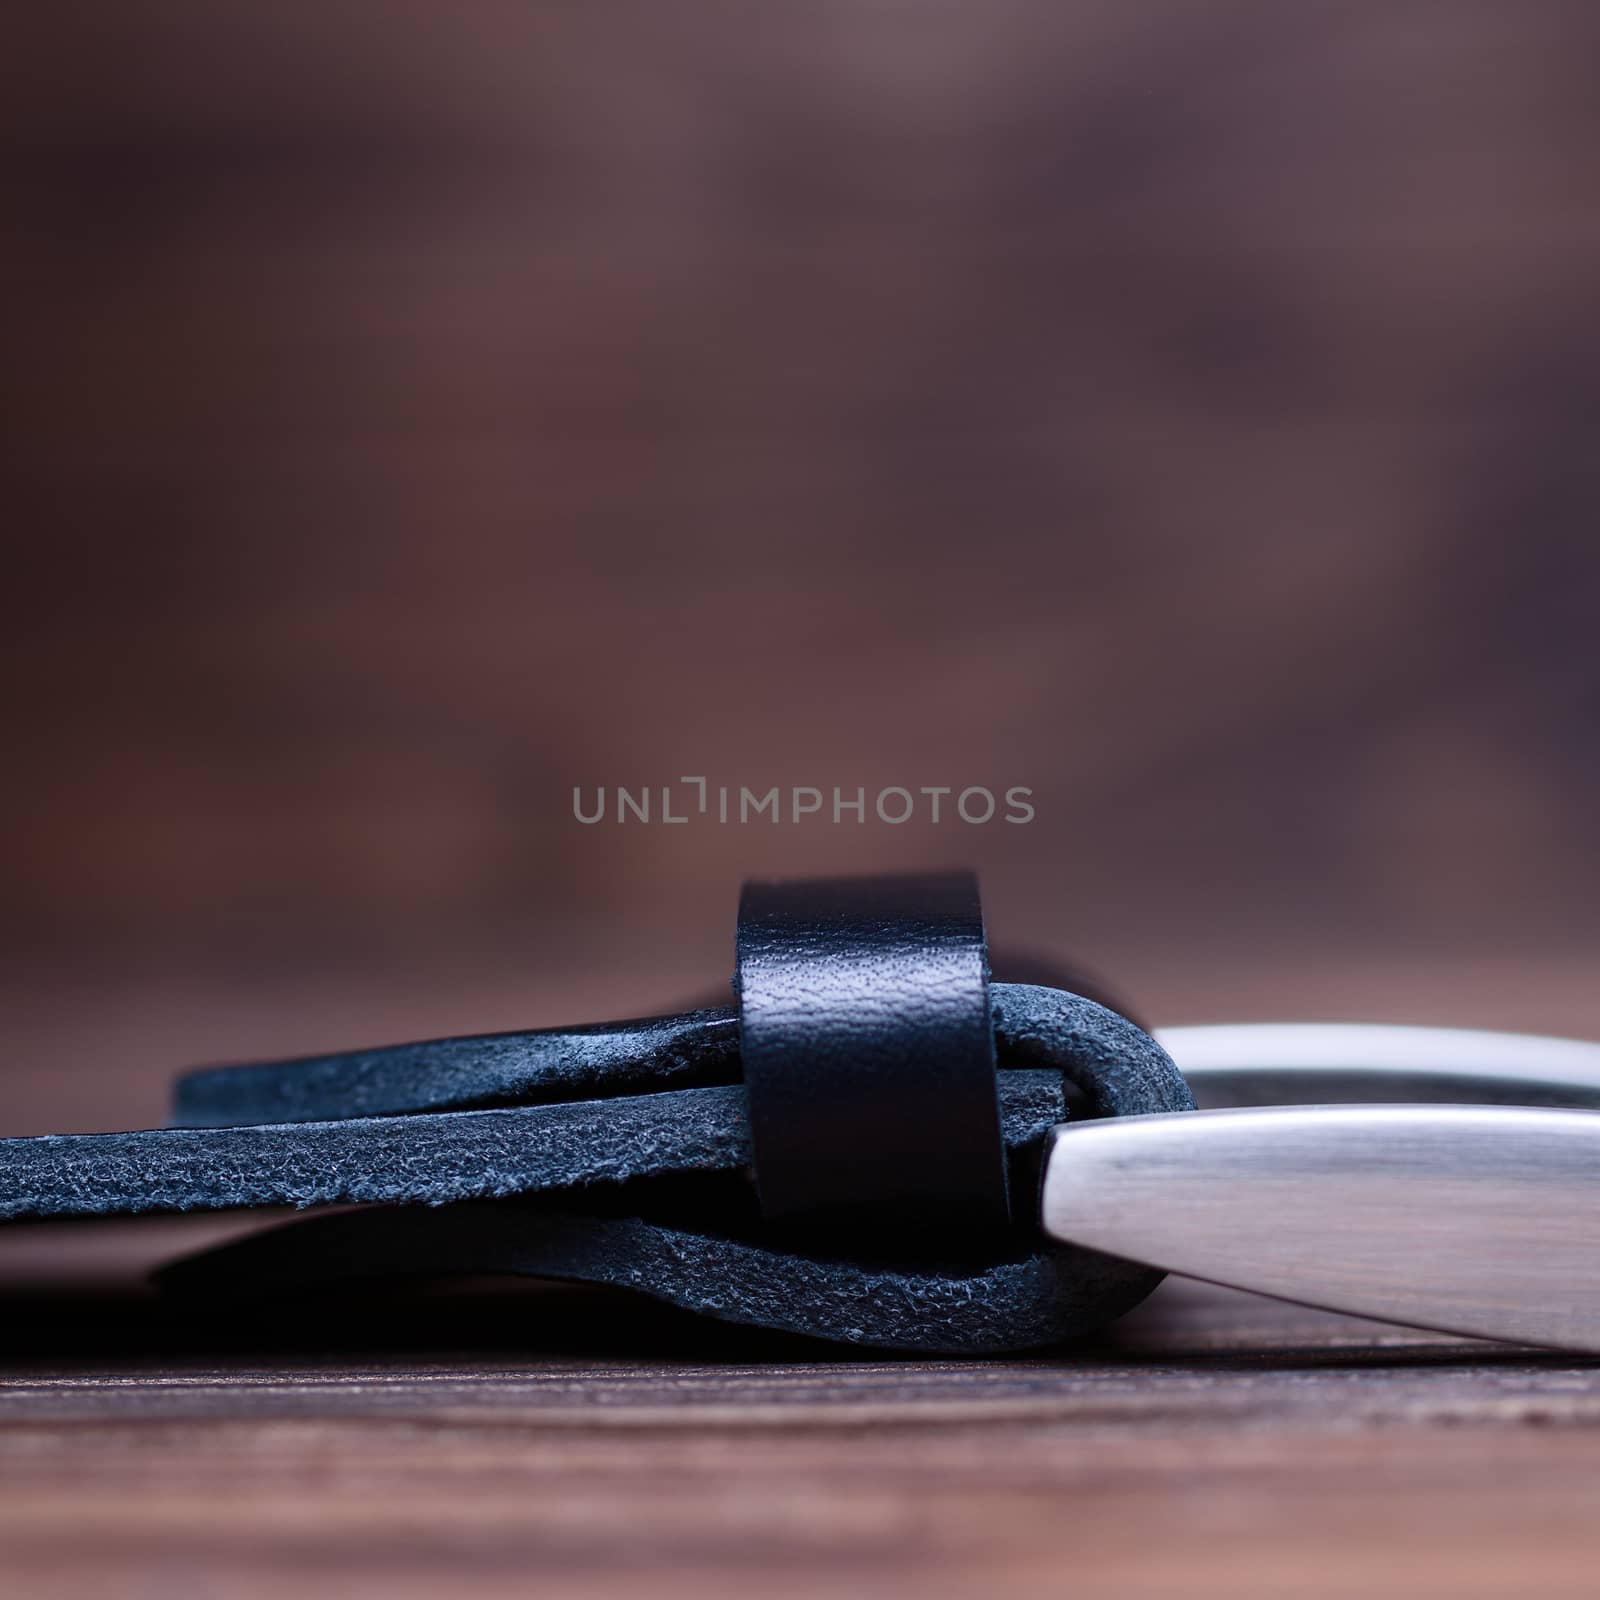 Black handmade belt buckle lies on textured wooden background closeup. Side view. Stock photo of businessman accessories with blurred background. by alexsdriver